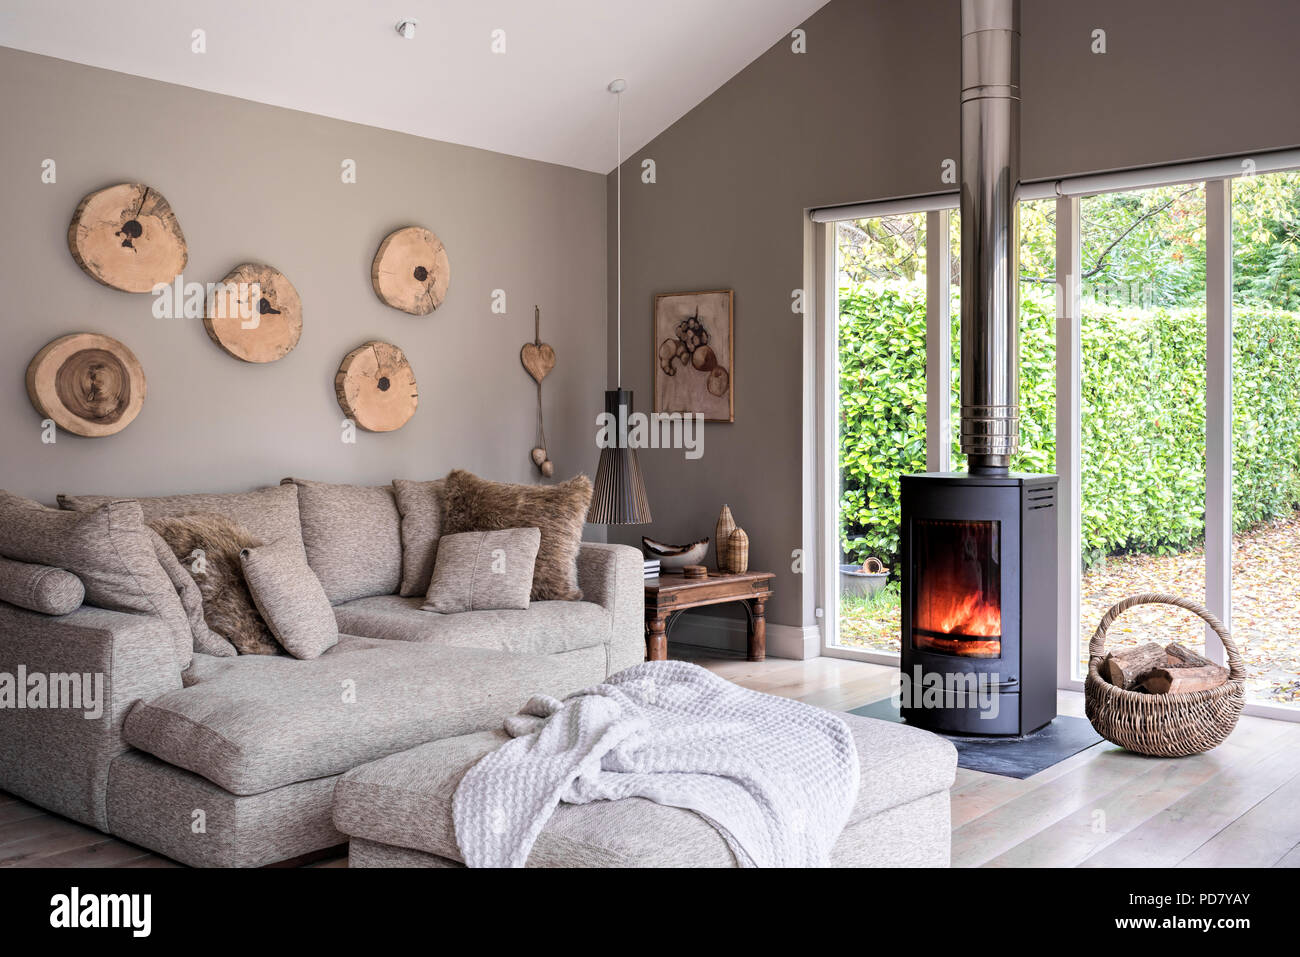 Large Linea sofa and foot stool in open plan living space with woodburning stove Stock Photo